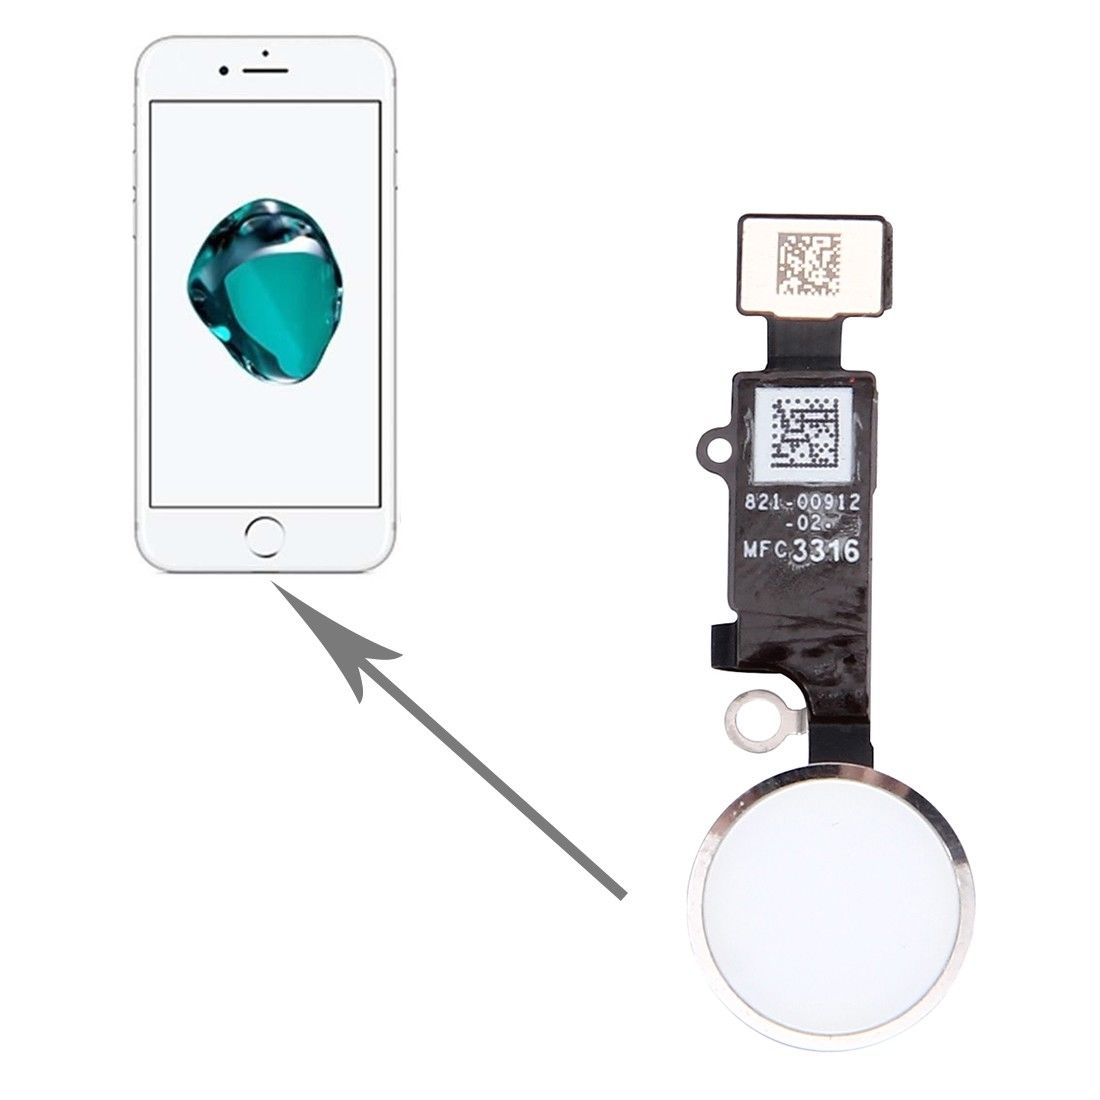 Apple iPhone 7 / 7 Plus Home Button Flex Cable - Silver for [product_price] - First Help Tech